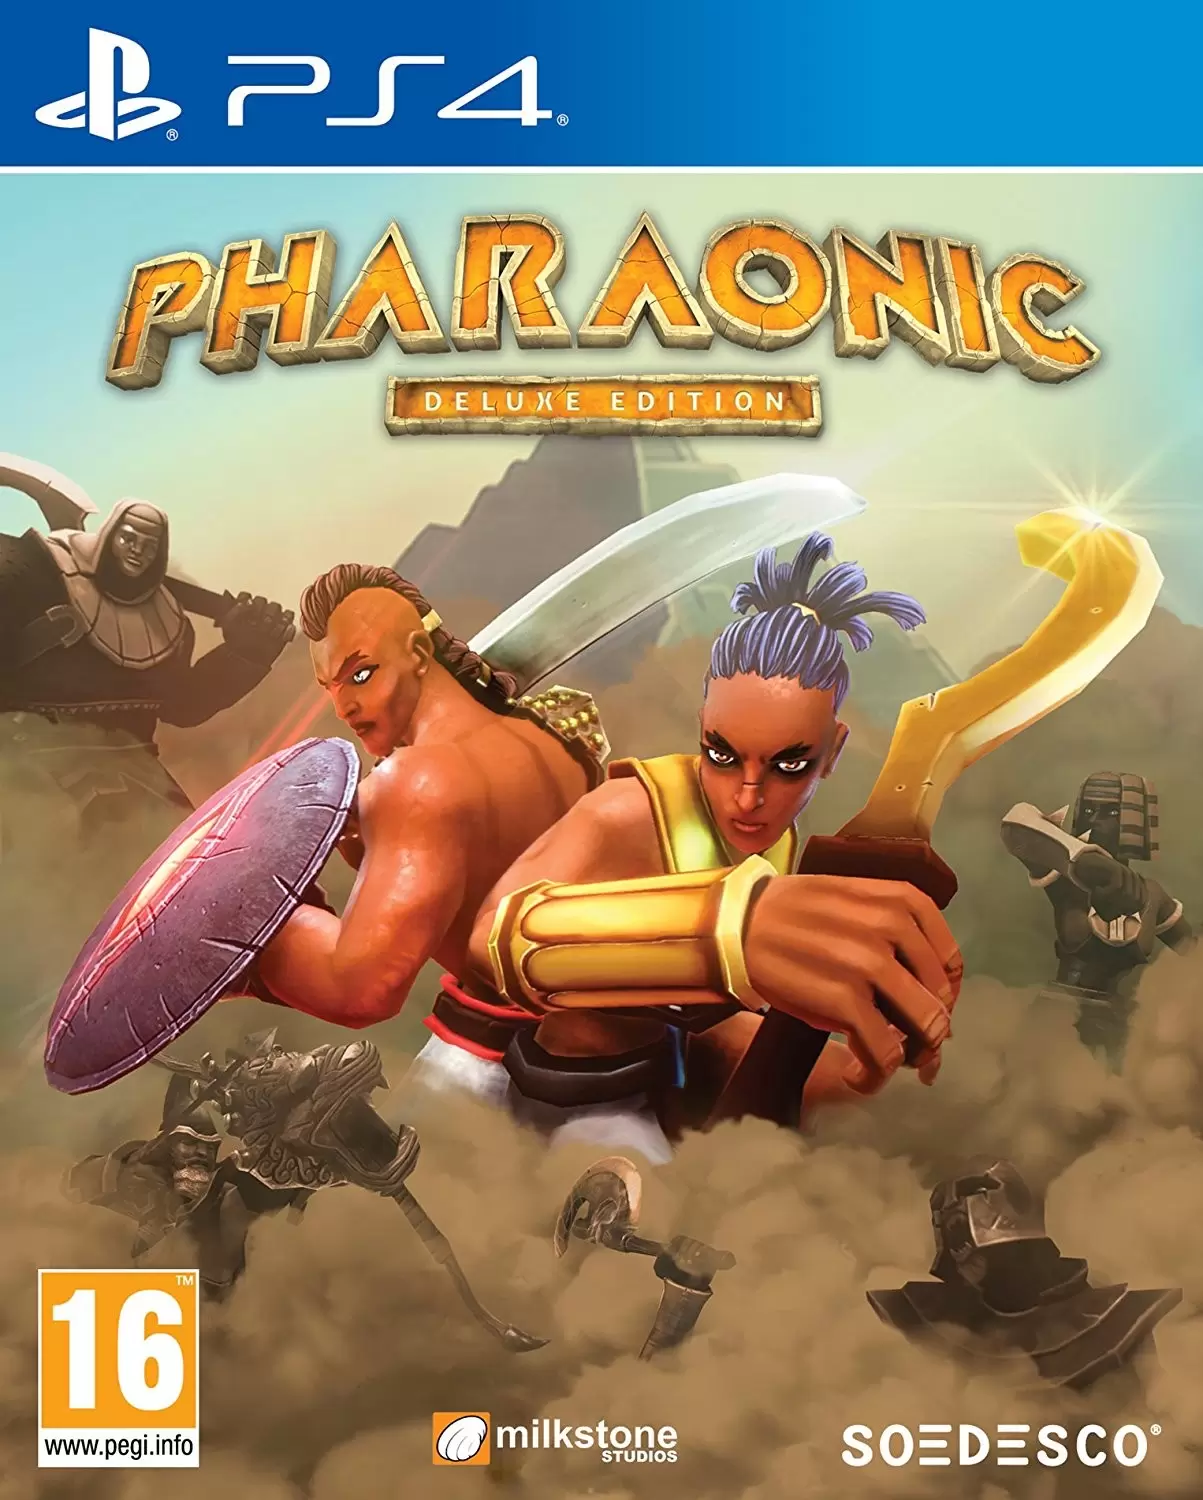 PS4 Games - Pharaonic - Deluxe Edition